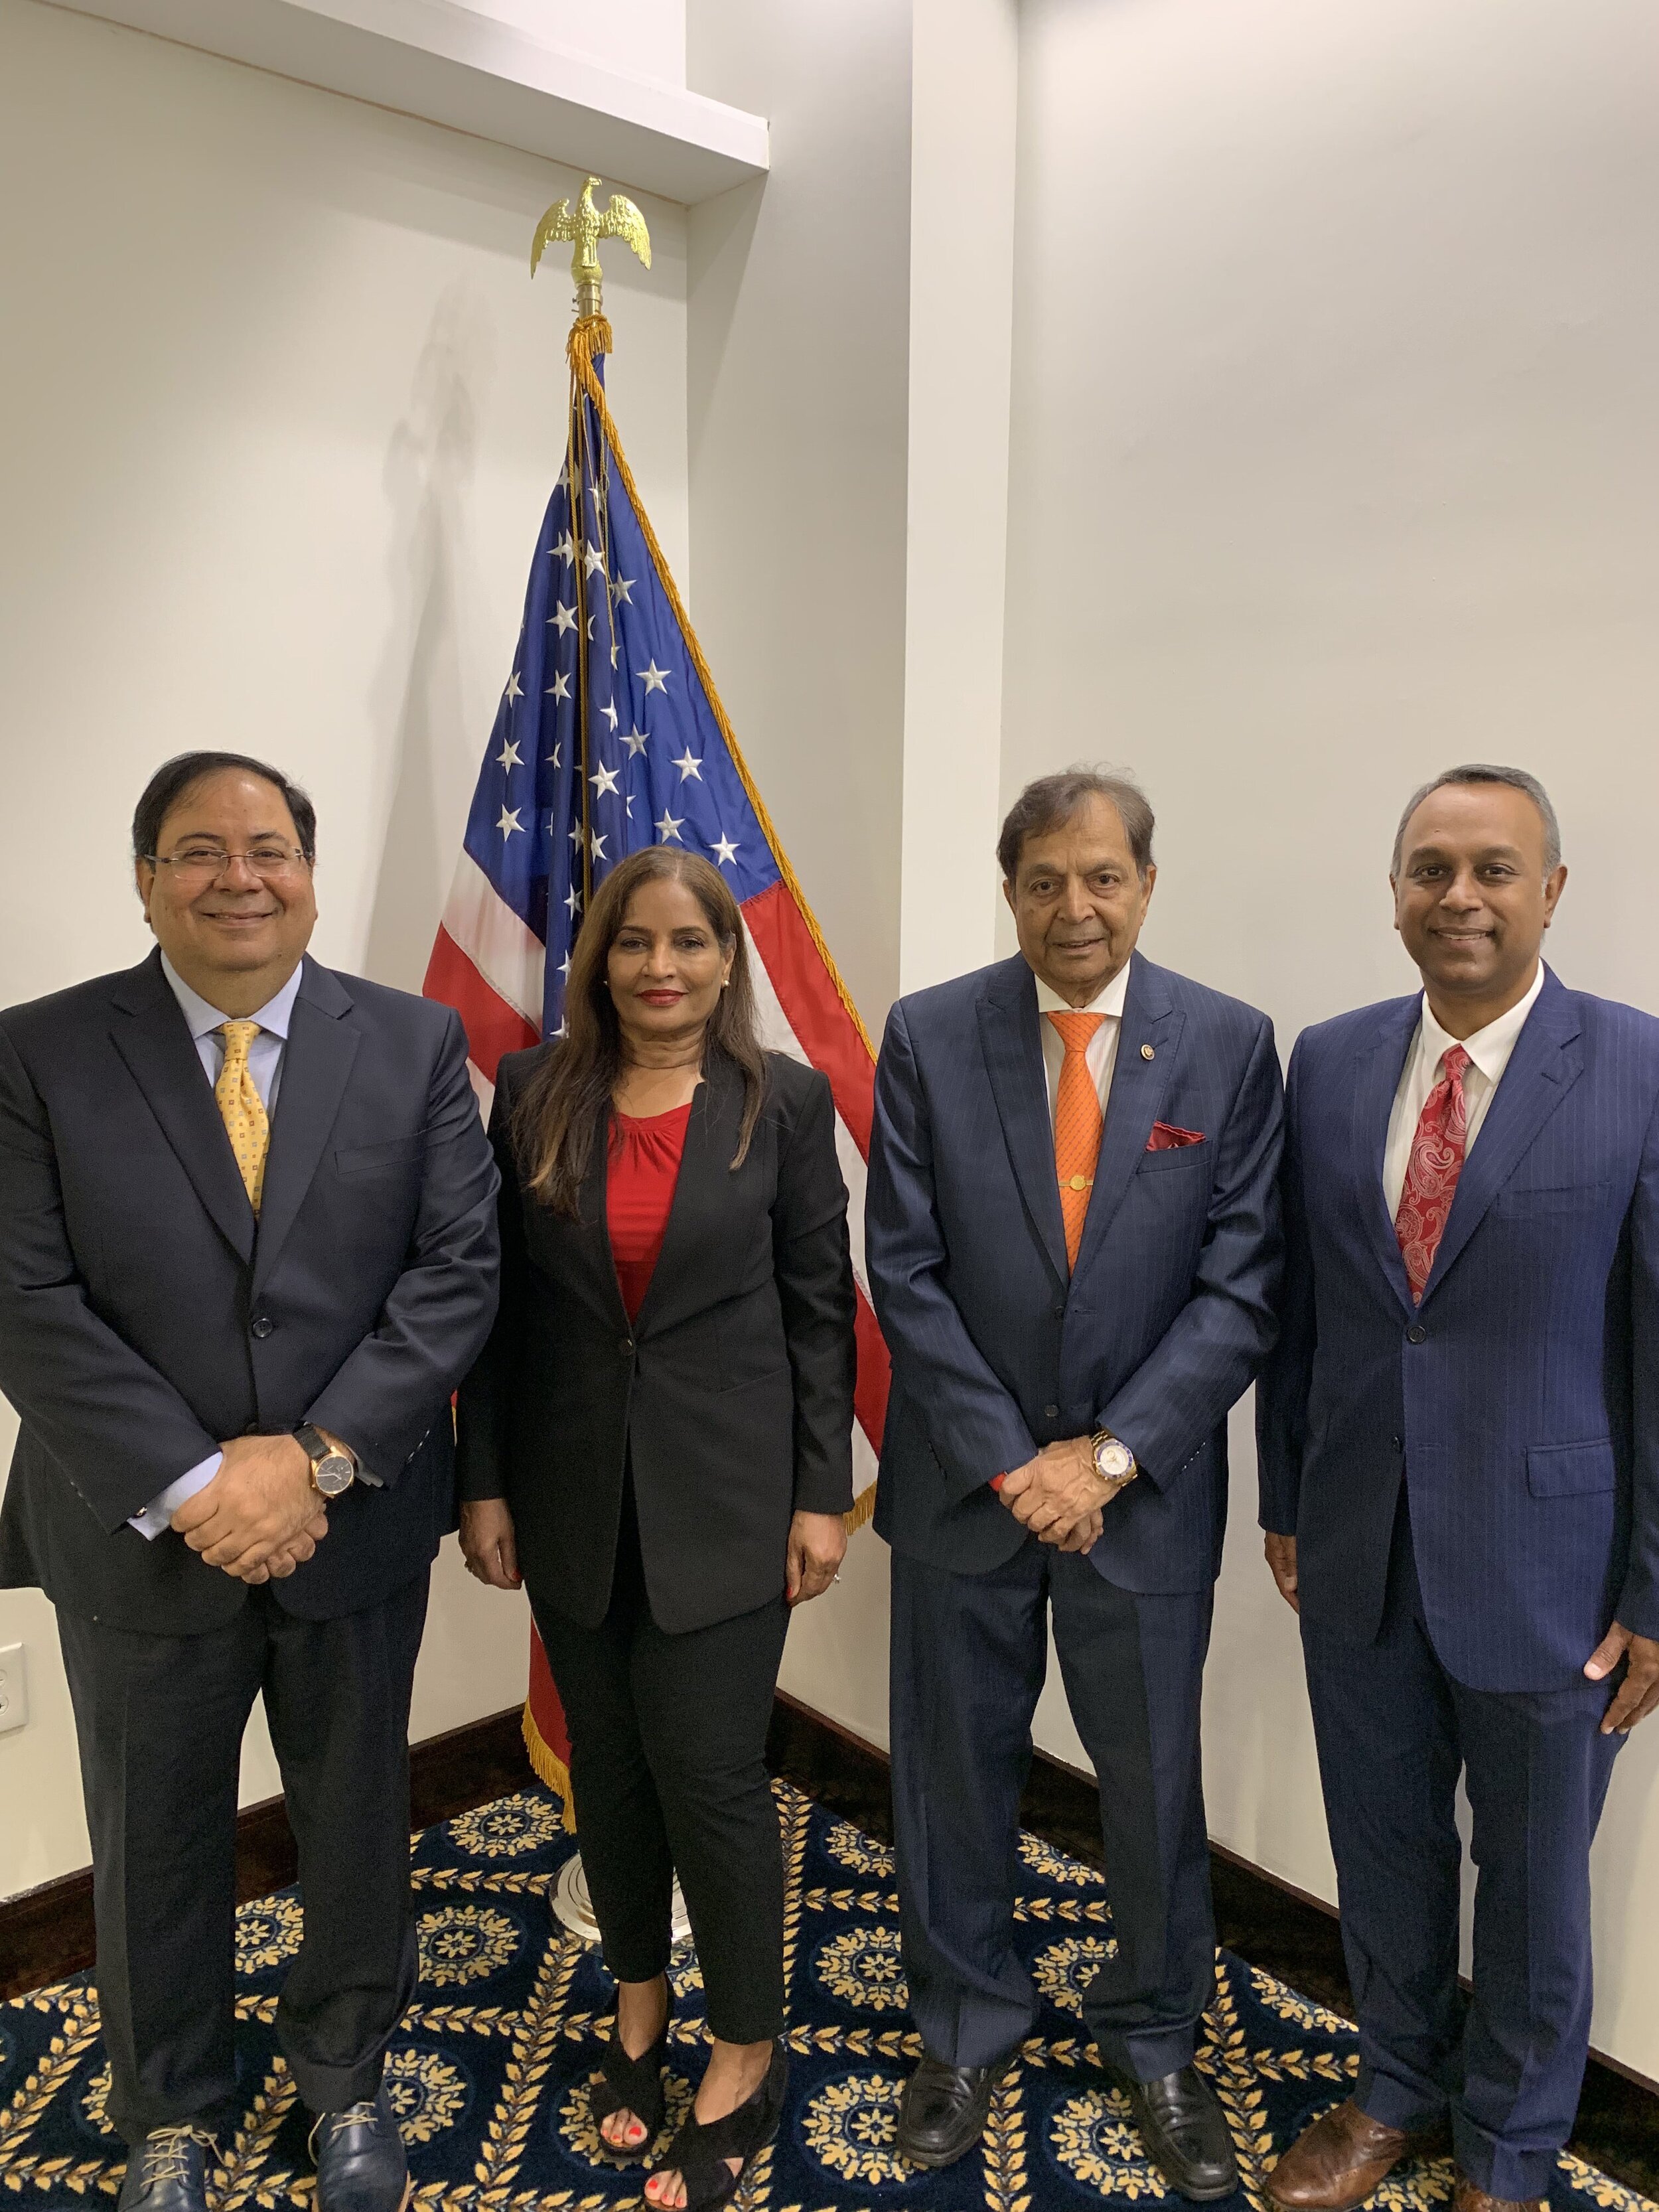   From Left to Right:  Mr. Suresh Nichani, Dr. Udaya Shivangi (American Association of Physicians of Indian Origin), Dr. Sampat Shivangi and Mr. Joel Anand Samy (Co-Founder of International Leaders Summit) 